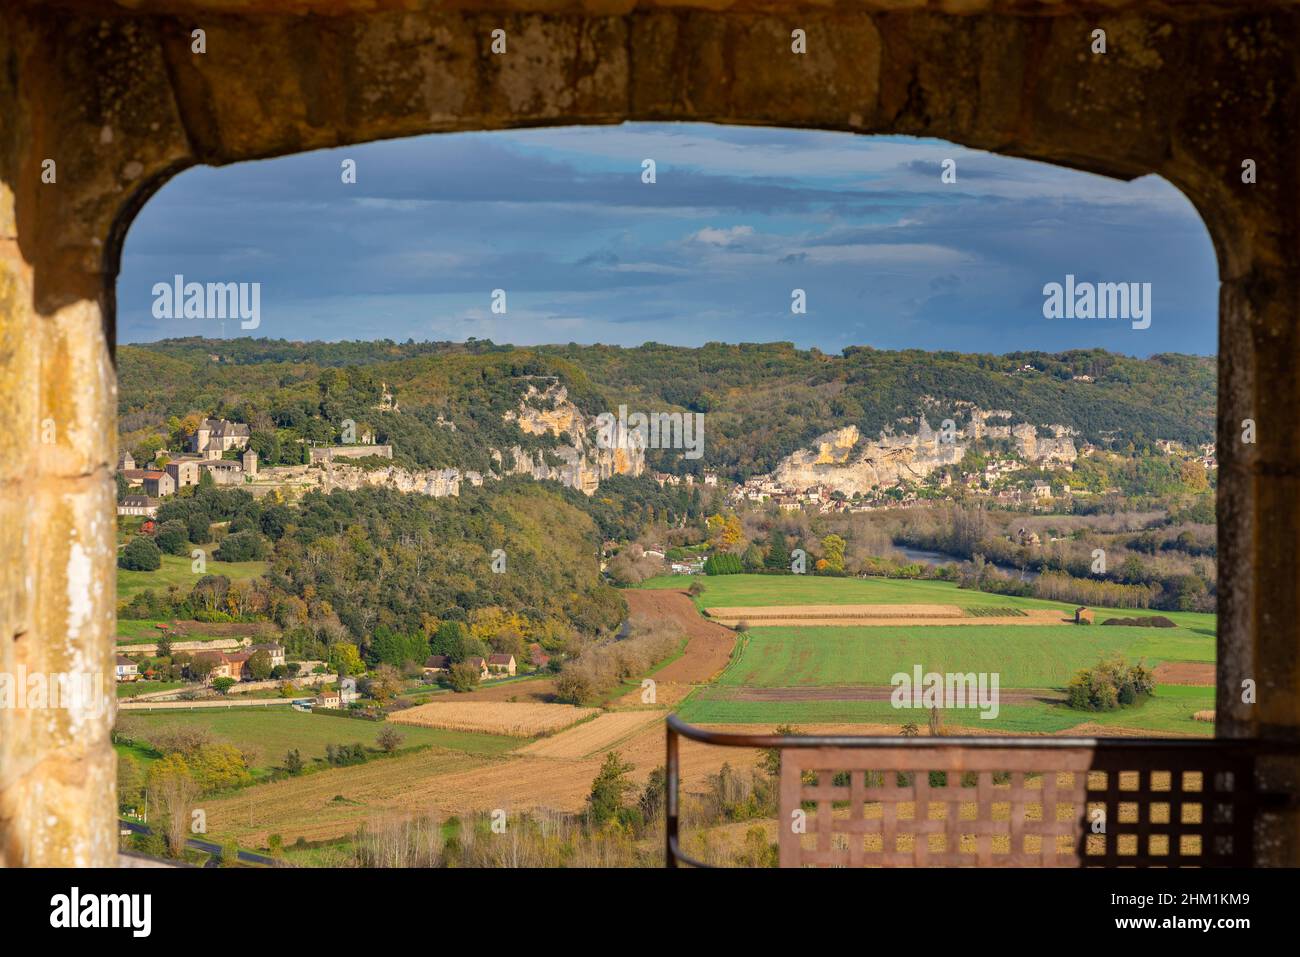 The town of La Roque-Gageac seen from the Castelnaud fortress. Taken in Perigord, France, on a sunny autumn afternoon Stock Photo